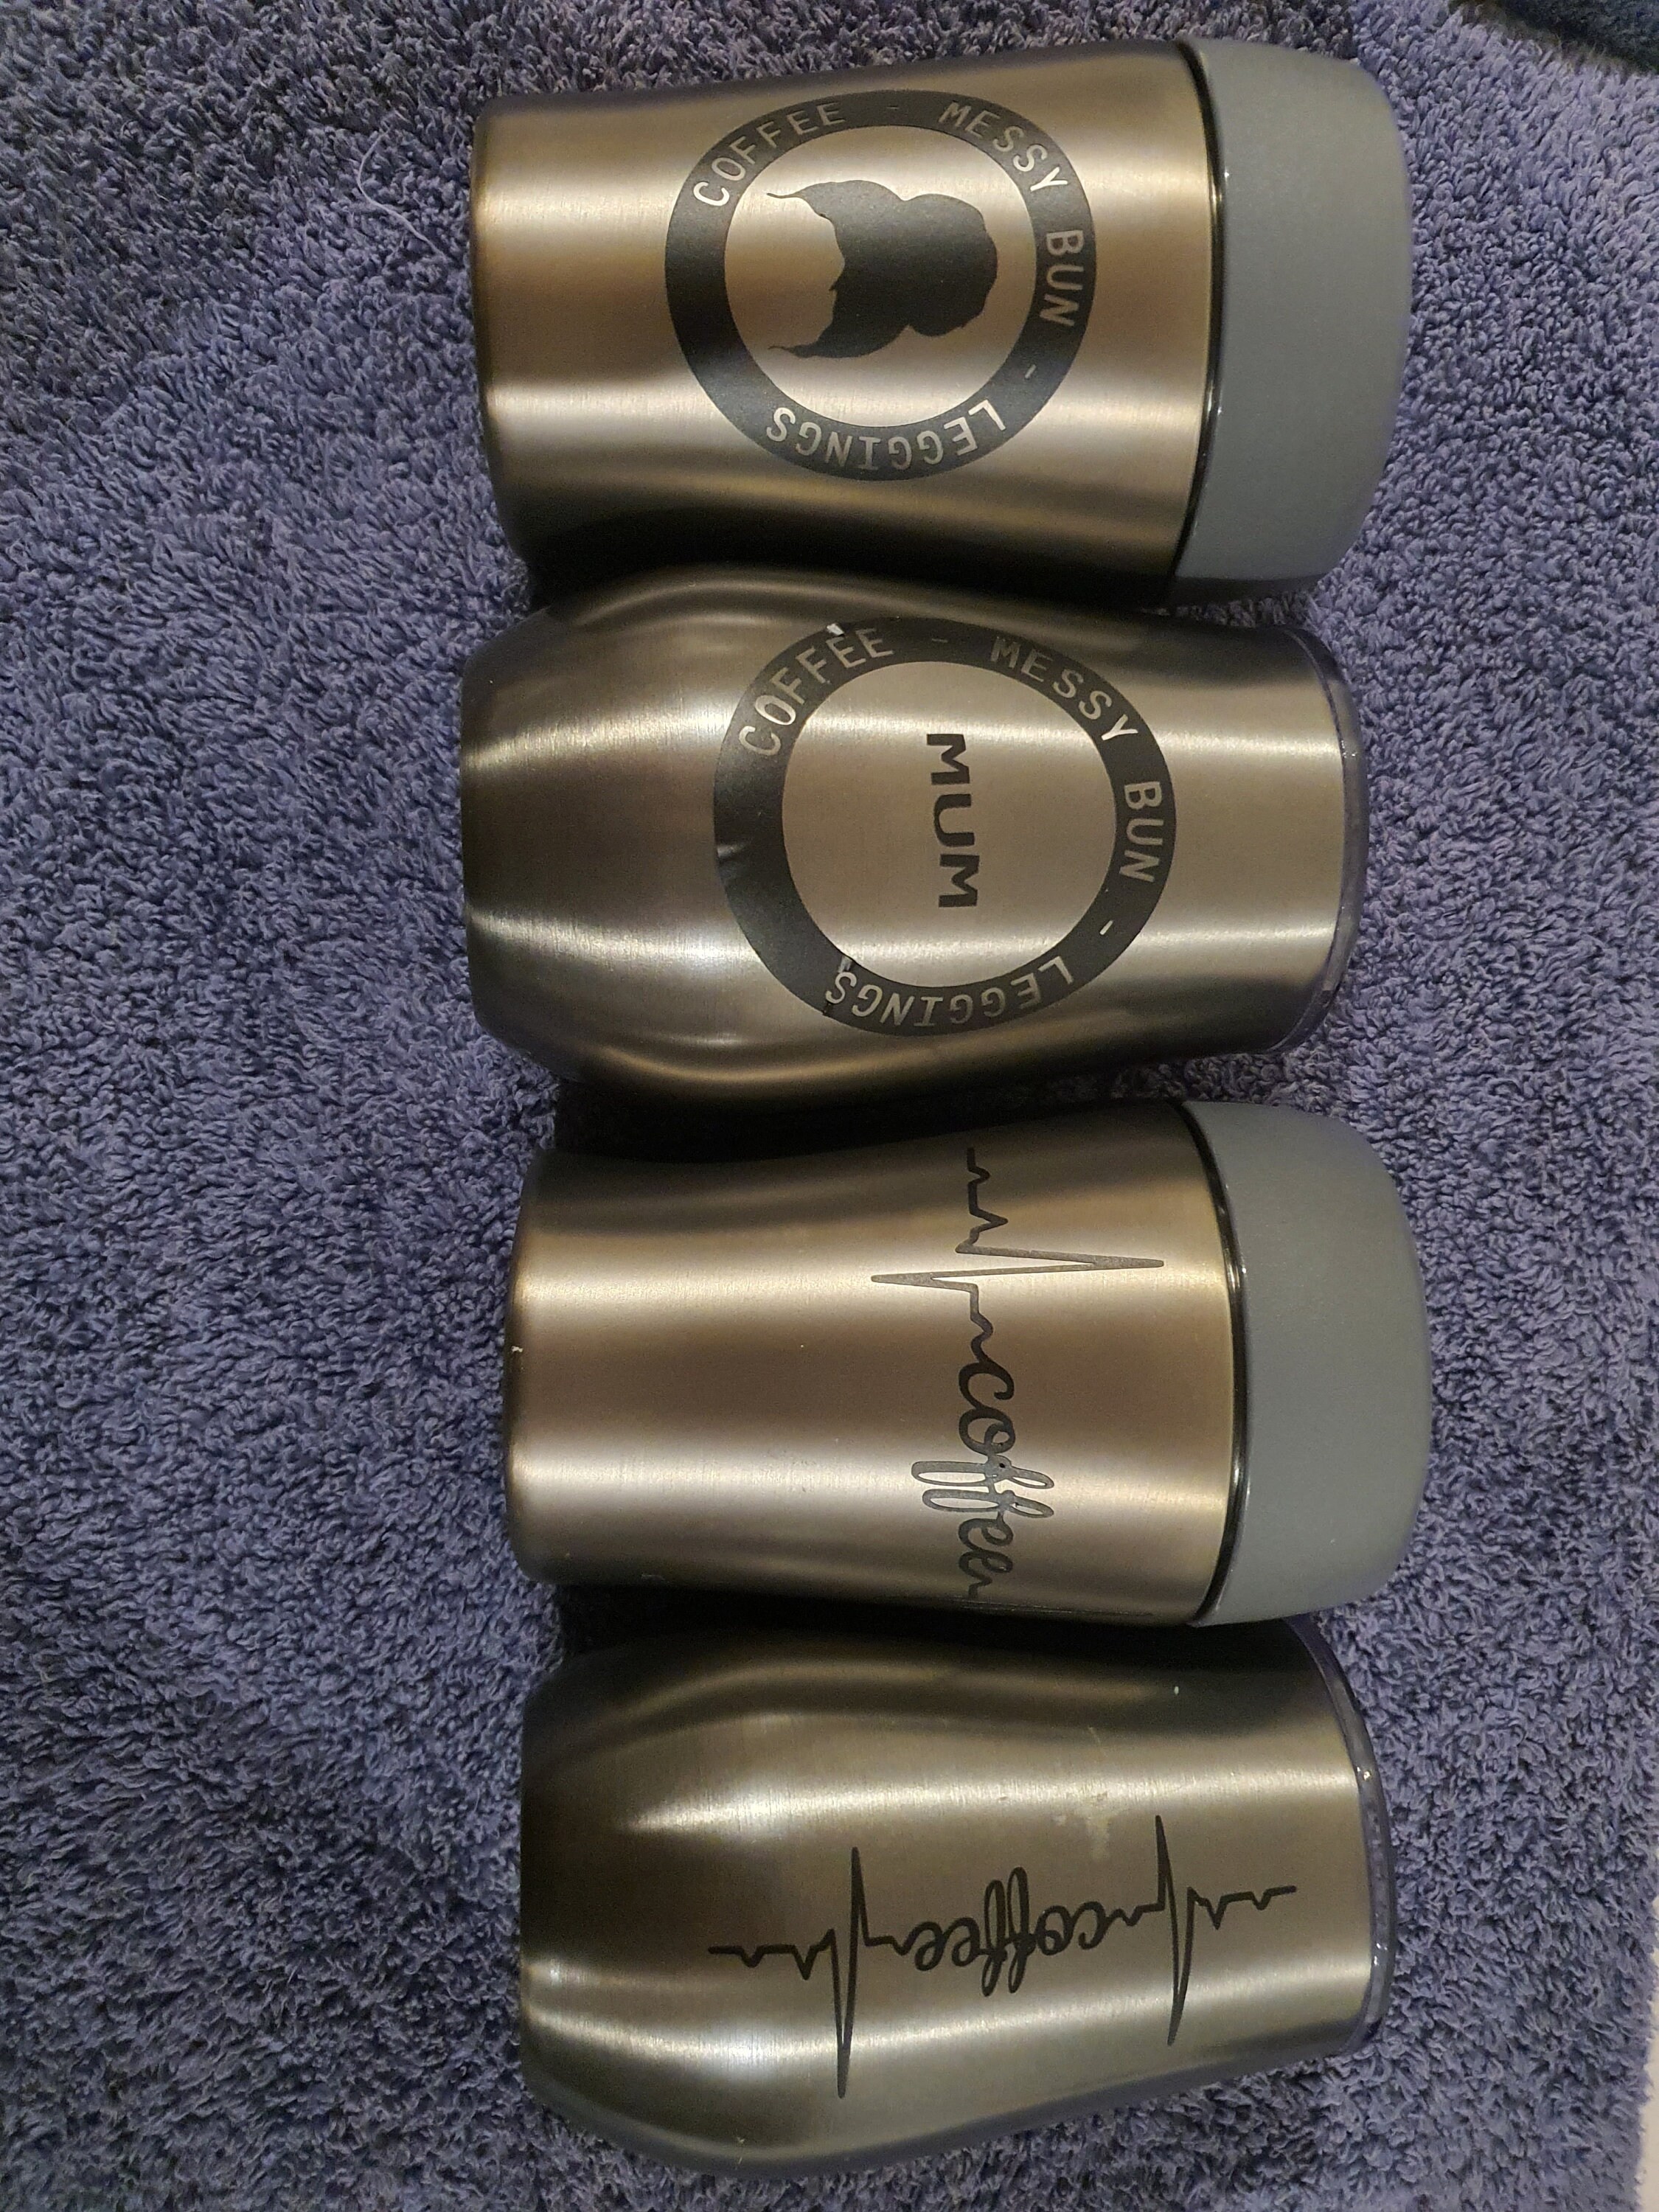 Engraved Luxe Matte Finish Stainless Steel Insulated Travel Mug 590mL